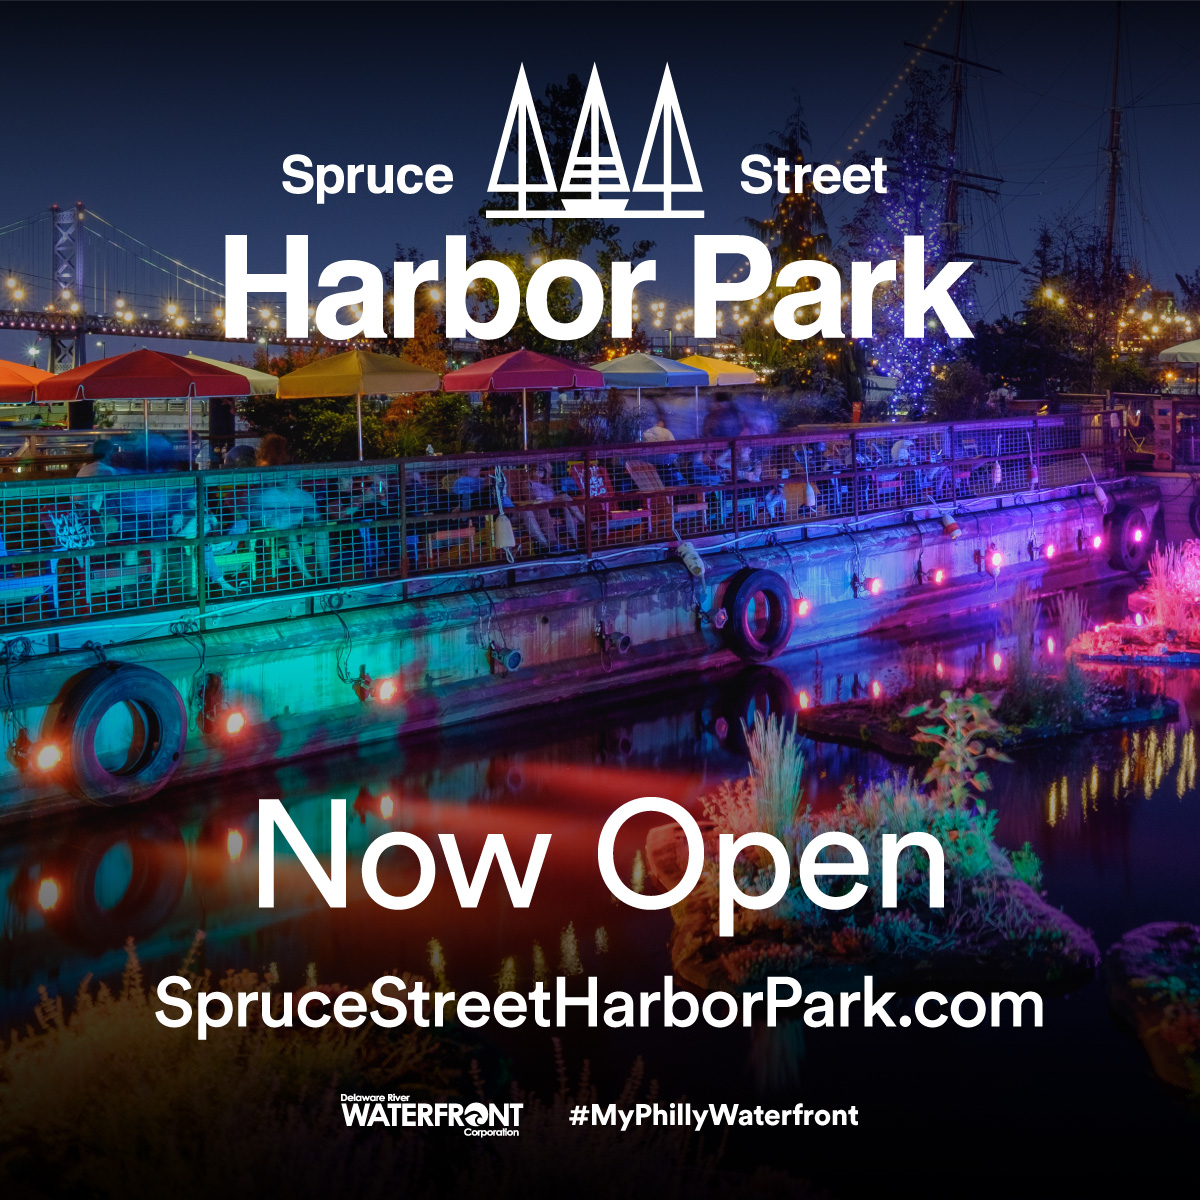 Spruce Street Harbor Park is OPEN! Come and join us on the #PhillyWaterfront this weekend as we welcome you back with the Afterwork Sessions, Saturday markets, and Family Fun Day Sundays with @PopUpPlay. We can’t wait to see you!

bit.ly/3pBsBBq

#SpruceStreetHarborPark